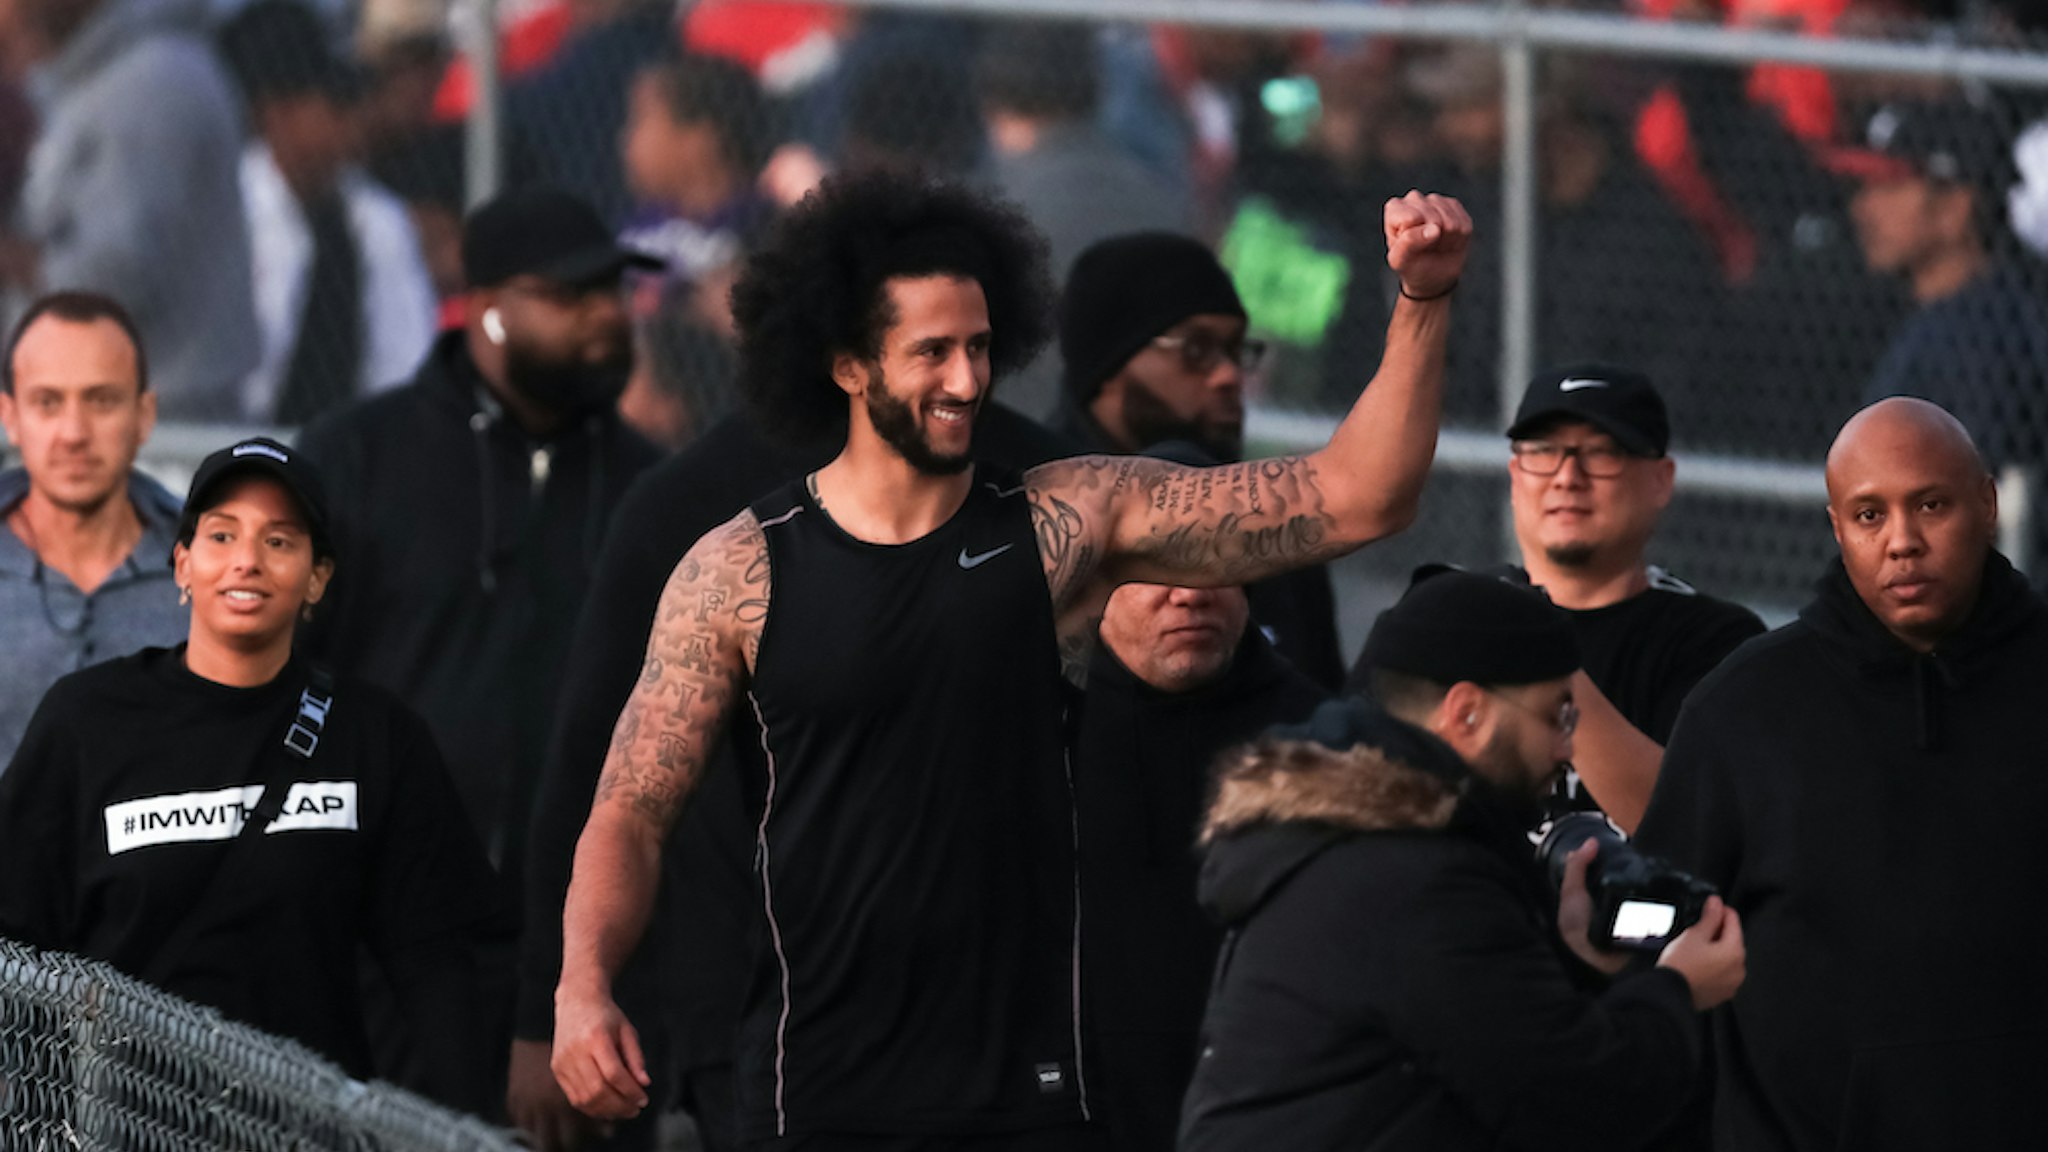 Colin Kaepernick visits with fans following his NFL workout held at Charles R Drew high school on November 16, 2019 in Riverdale, Georgia. (Photo by Carmen Mandato/Getty Images)